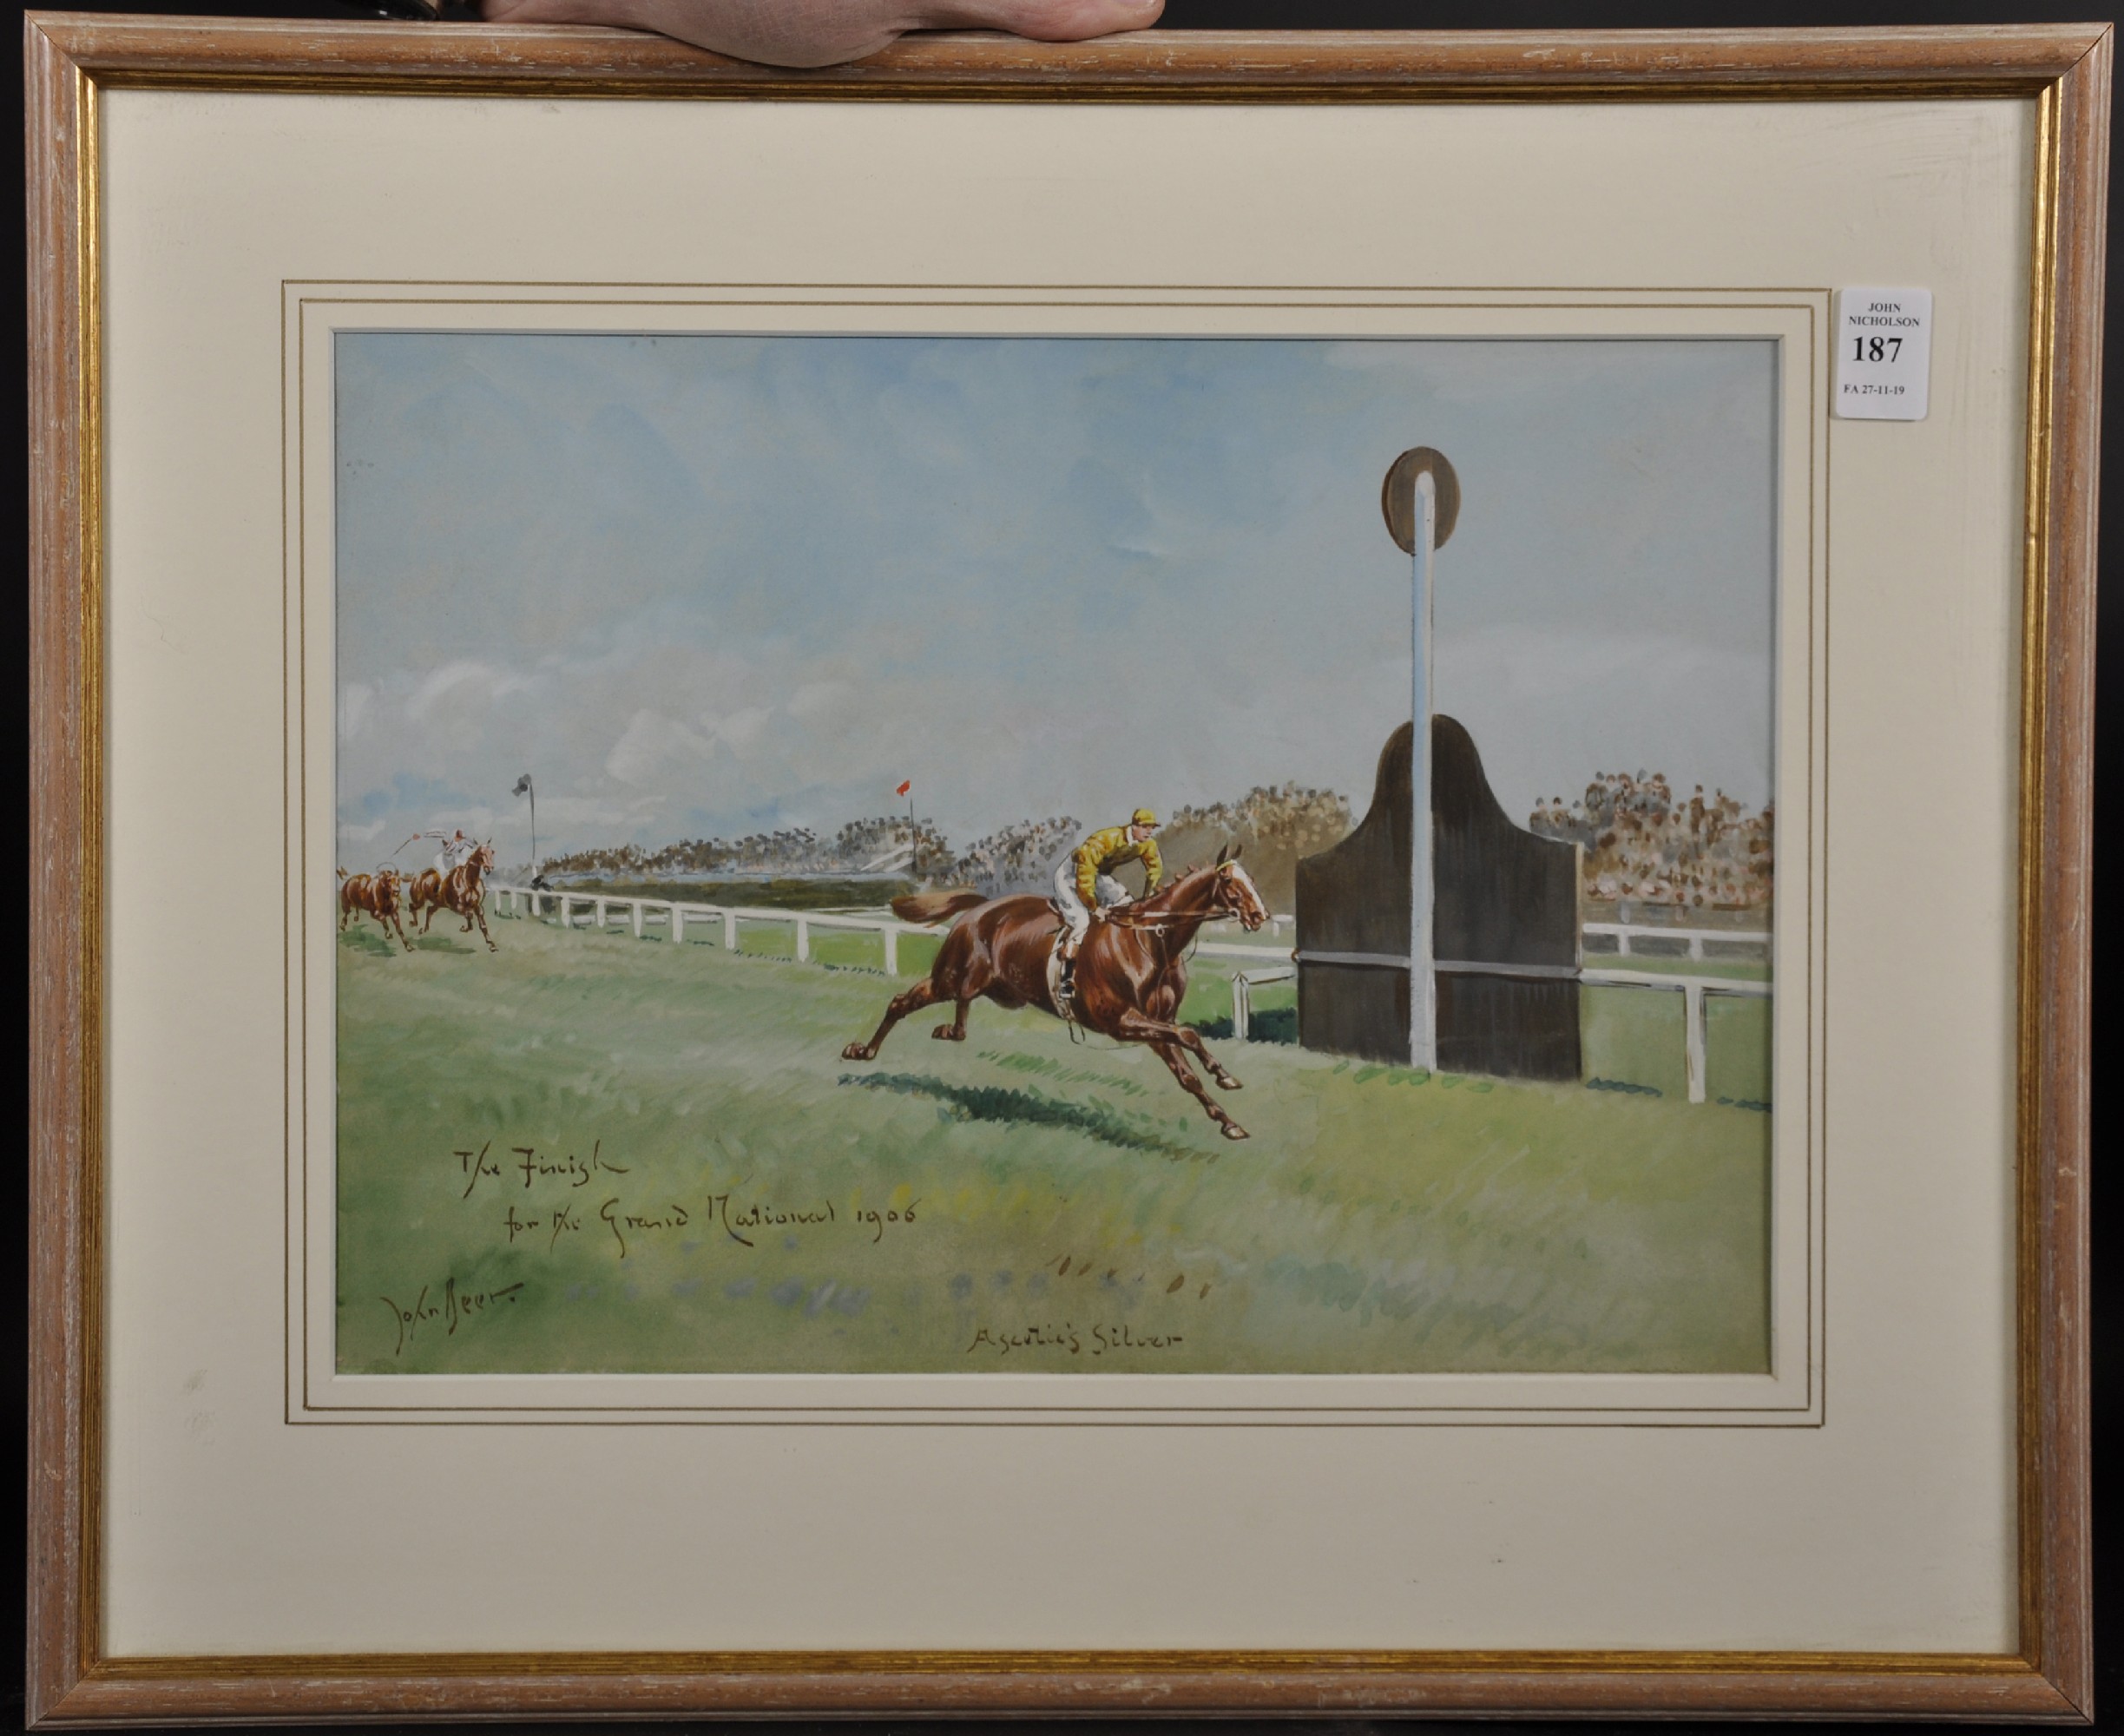 John Beer (1883-1915) British. "Ascetic's Silver", 'The Finish for the Grand National, 1906', - Image 2 of 4